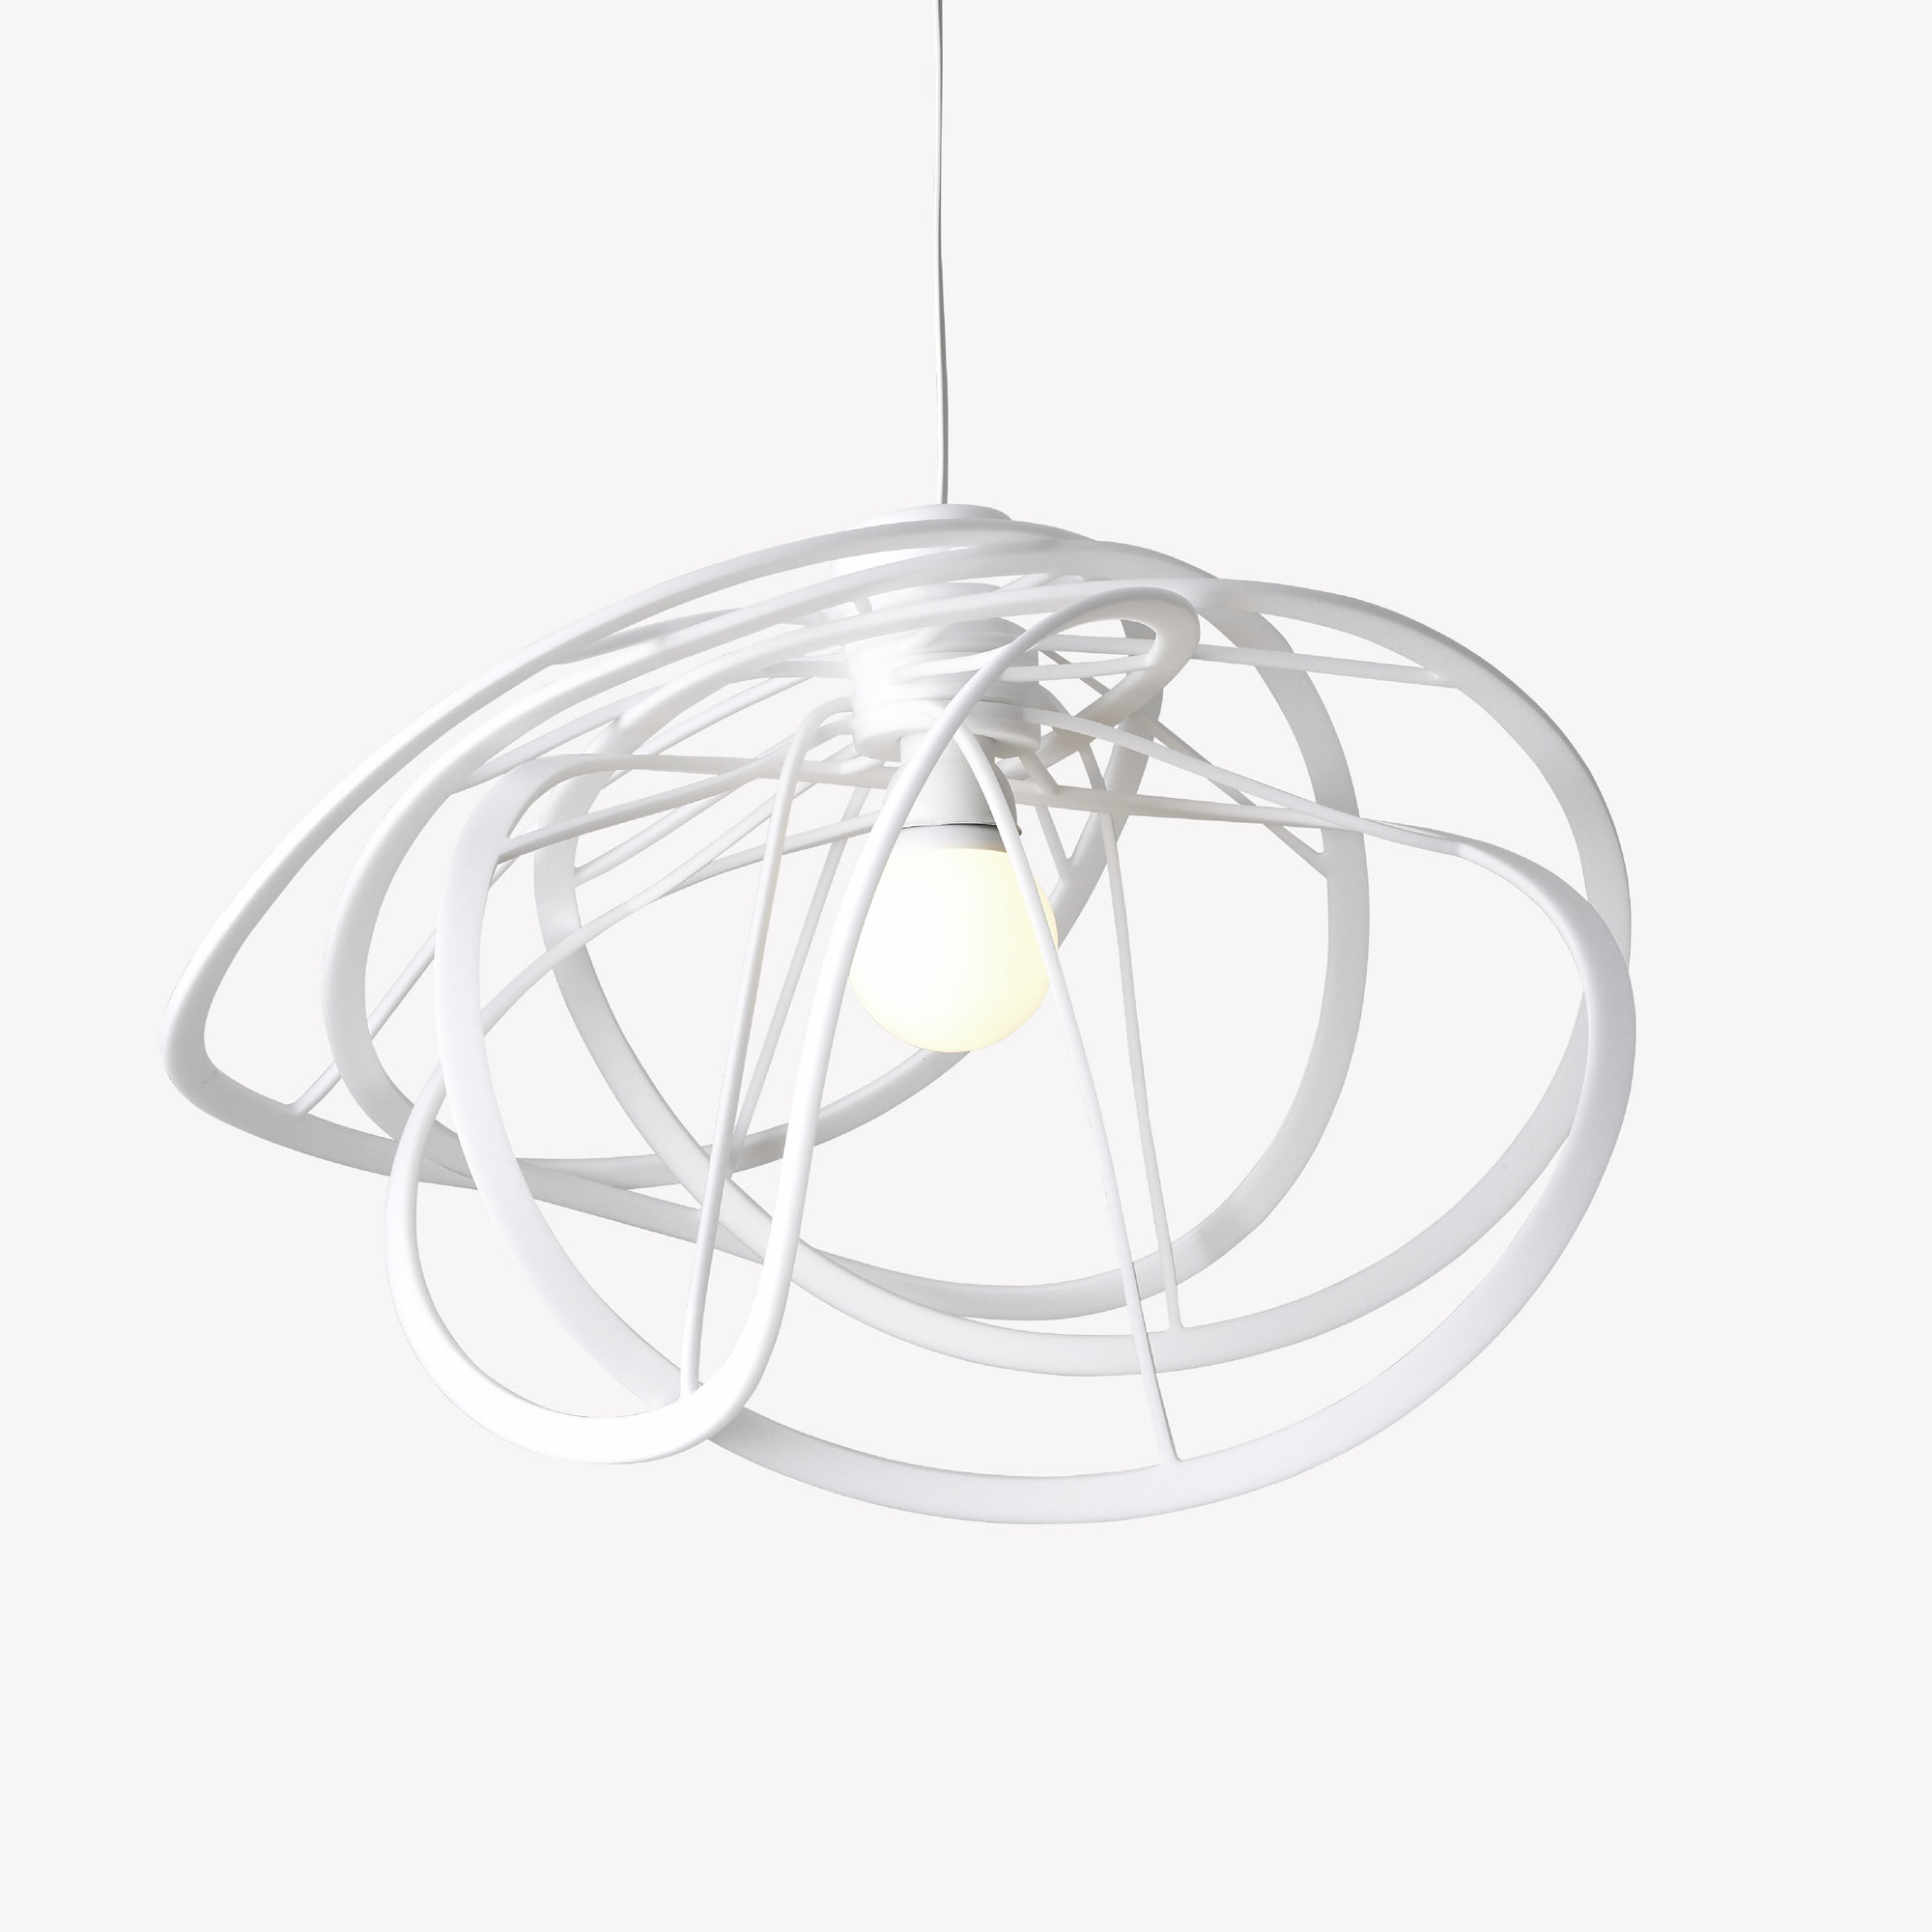 Image Suspended ceiling light white large 2